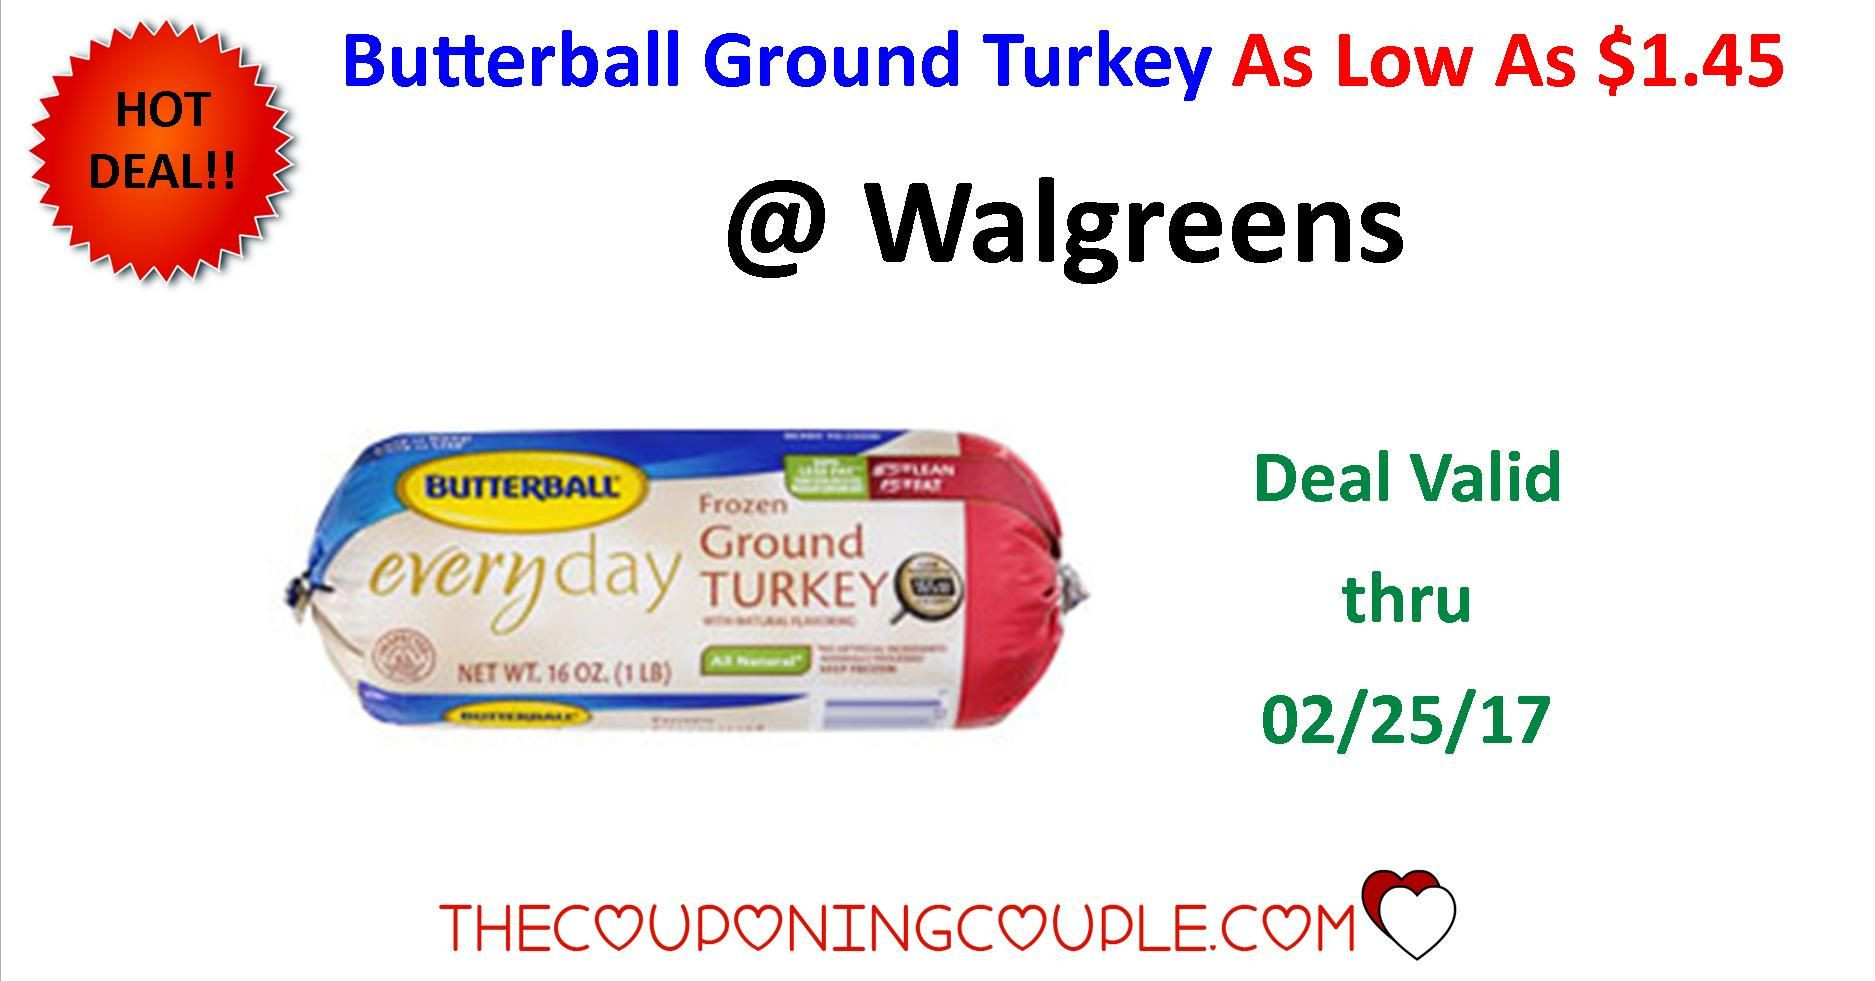 Ground Turkey Coupons
 Great deal on Butterball Ground Turkey ONLY $1 45